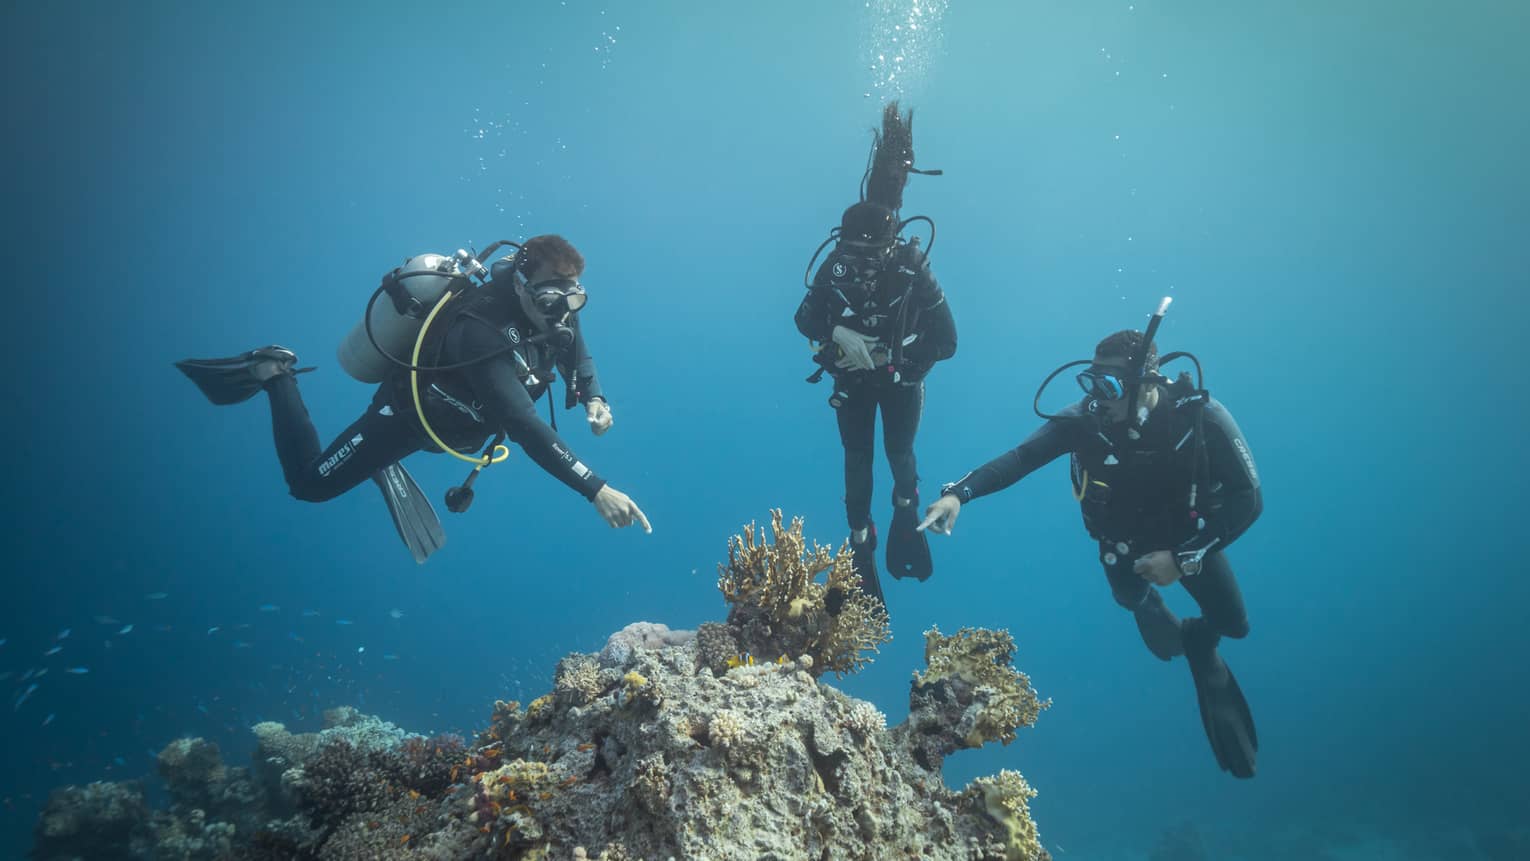 Front view of three scuba divers in clear, dark waters; two divers point at a group of yellow coral protruding from the rock.